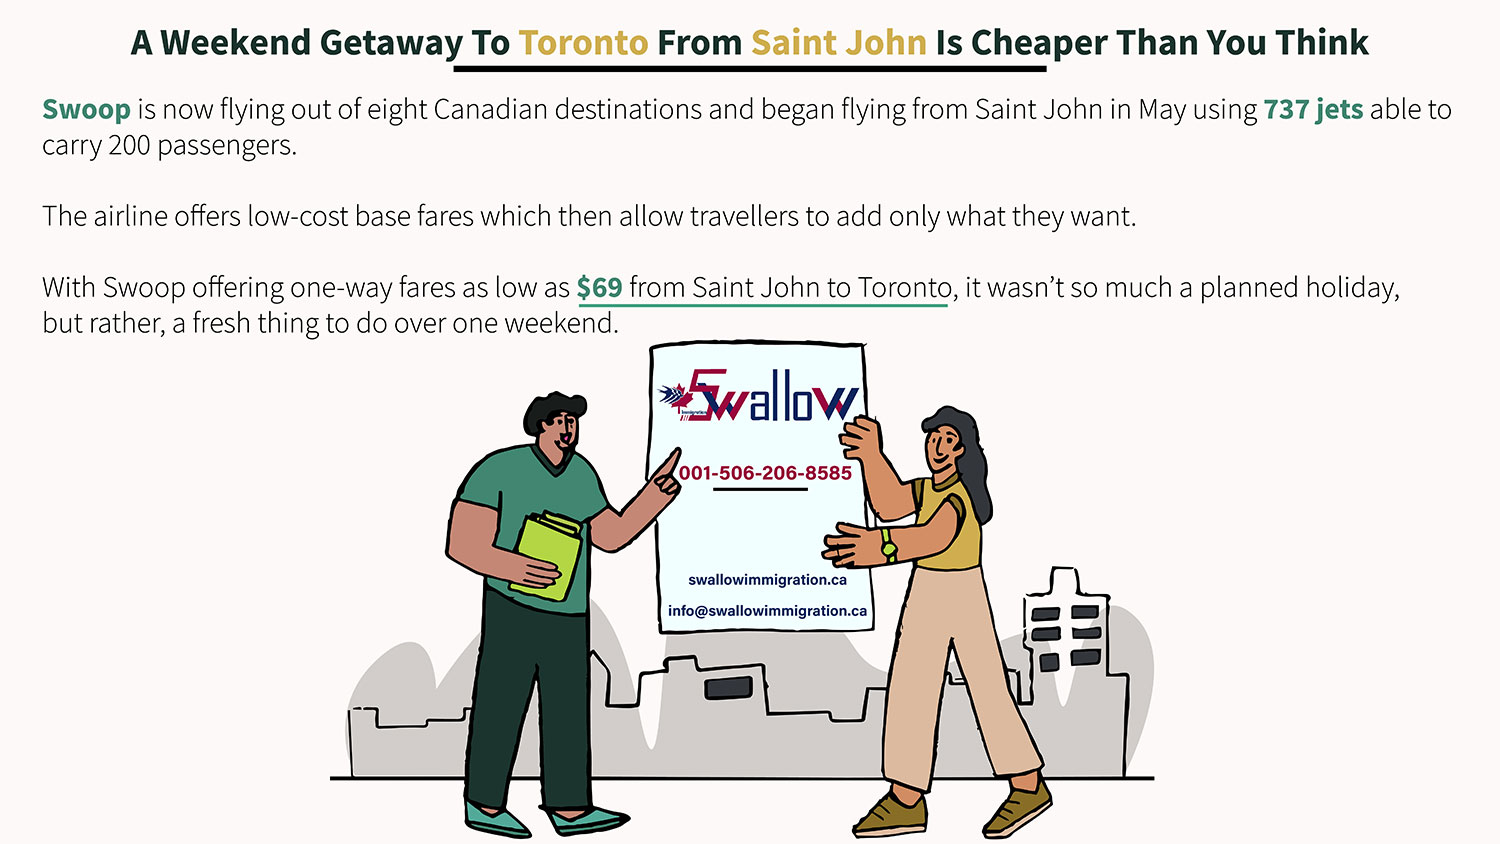 A Weekend Getaway To Toronto From Saint John Is Cheaper Than You Think